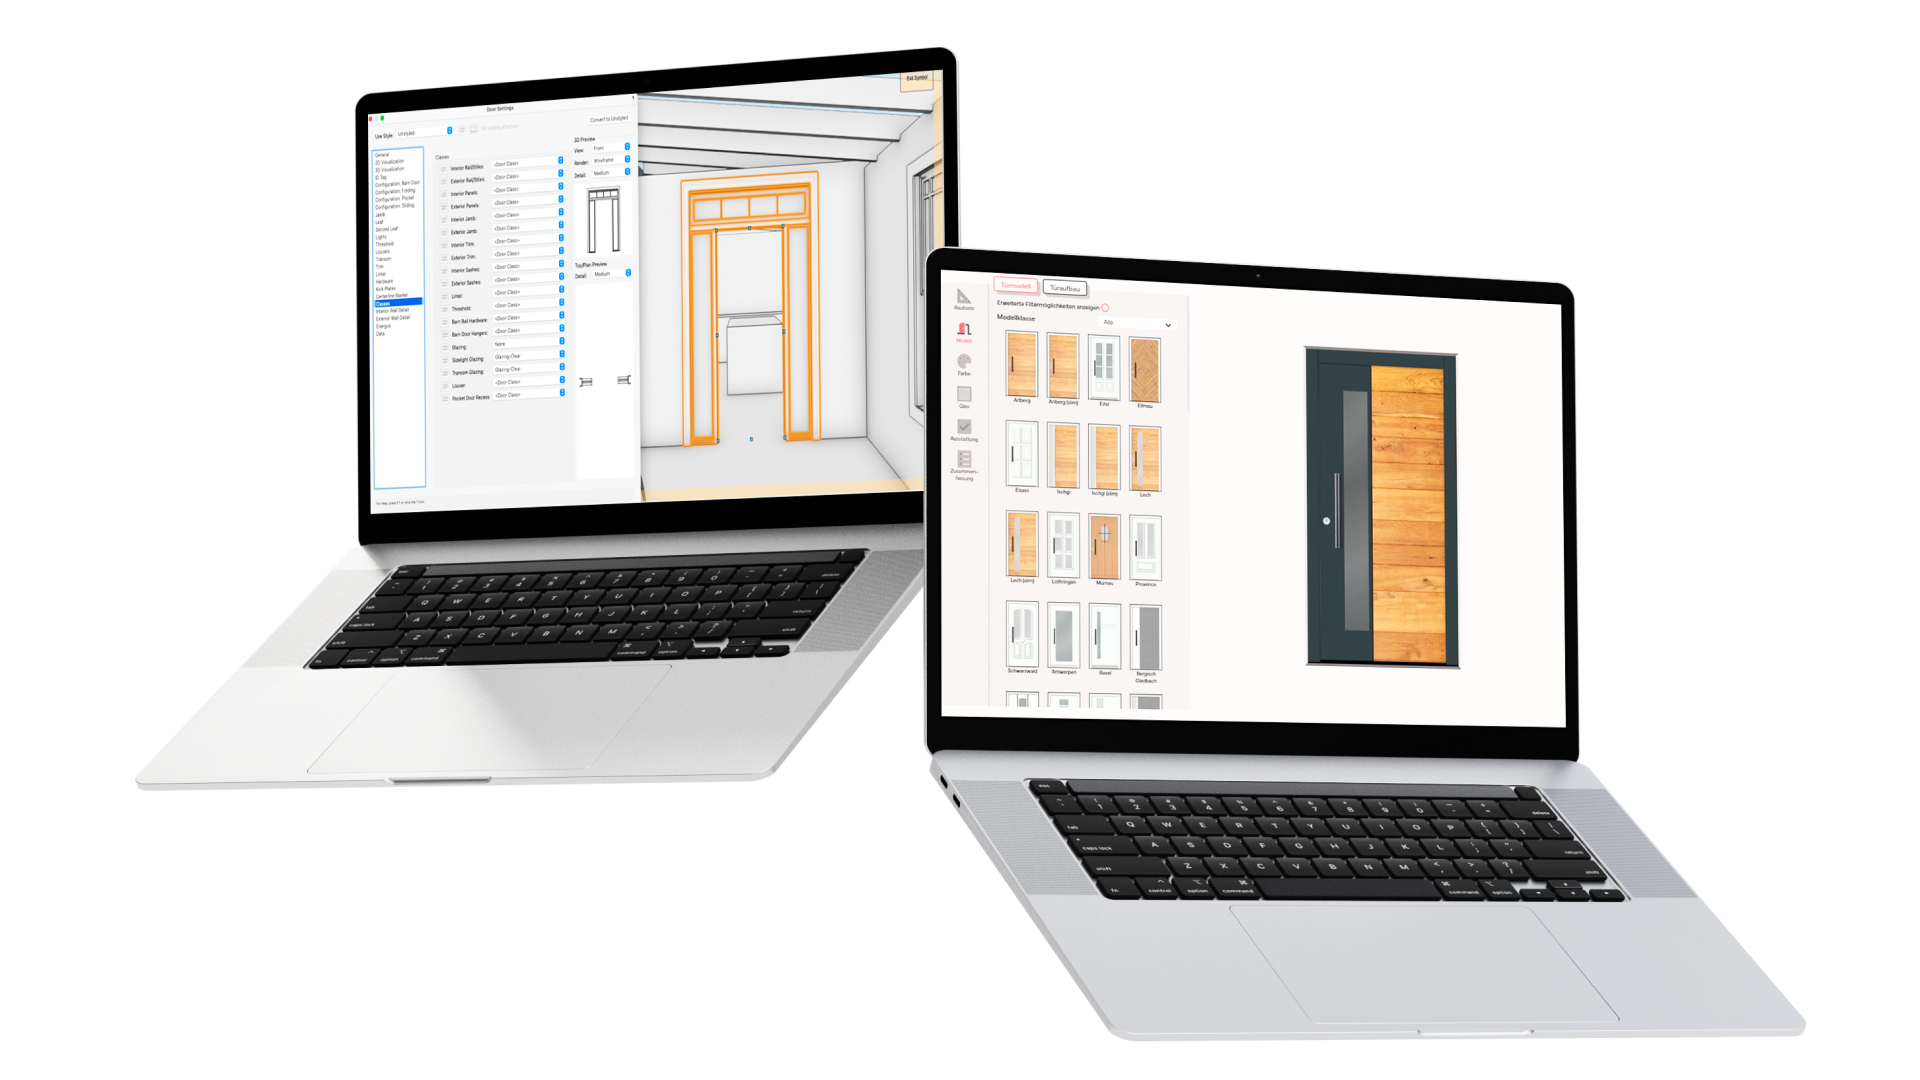 Development of a 2D door configurator for home or office